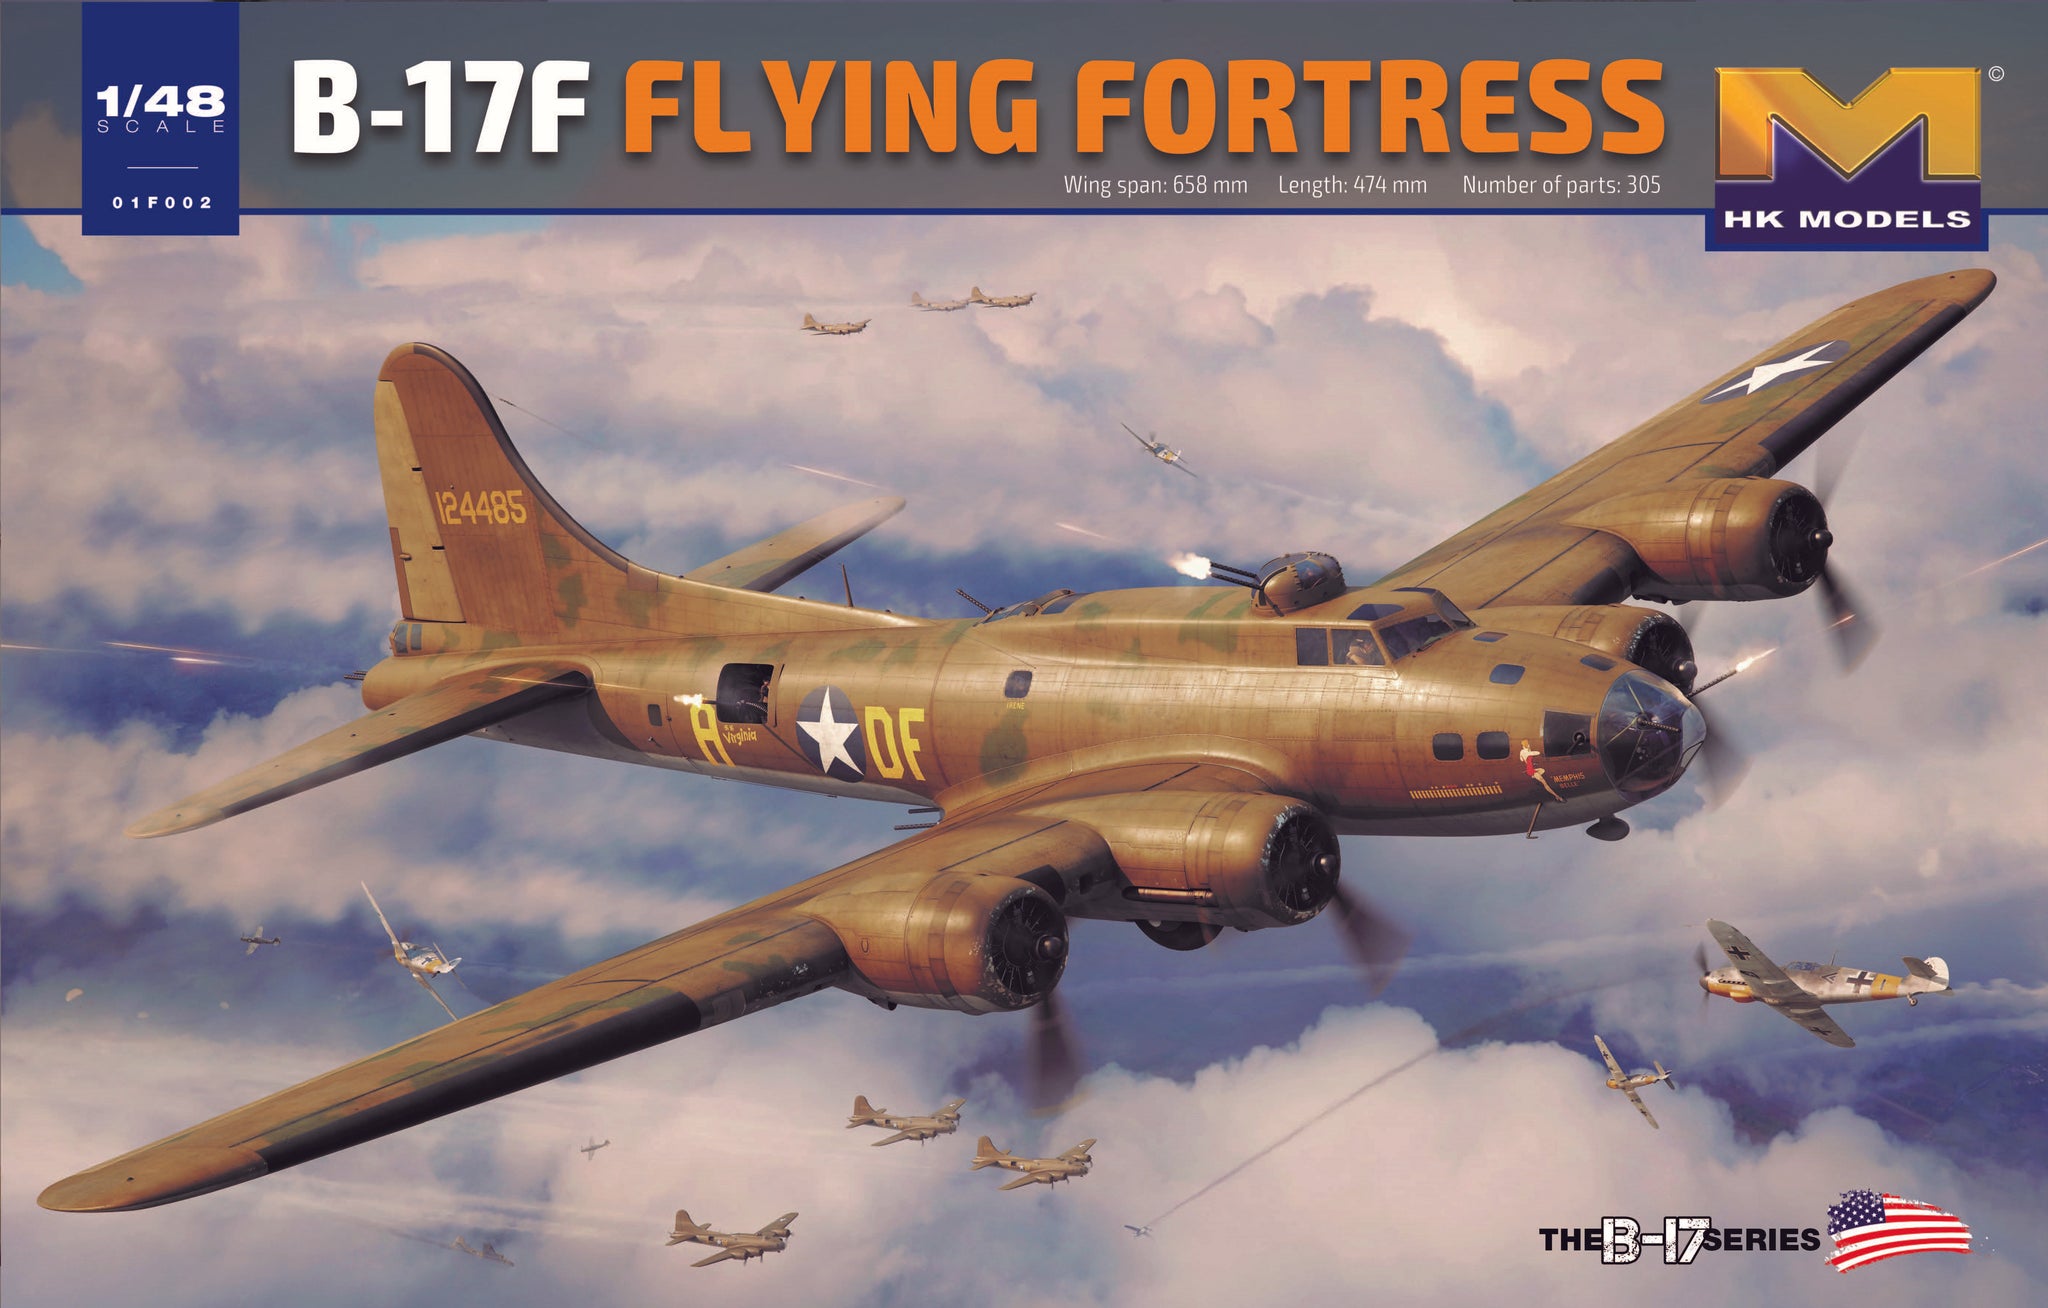 Gallery: The B-17 Flying Fortress